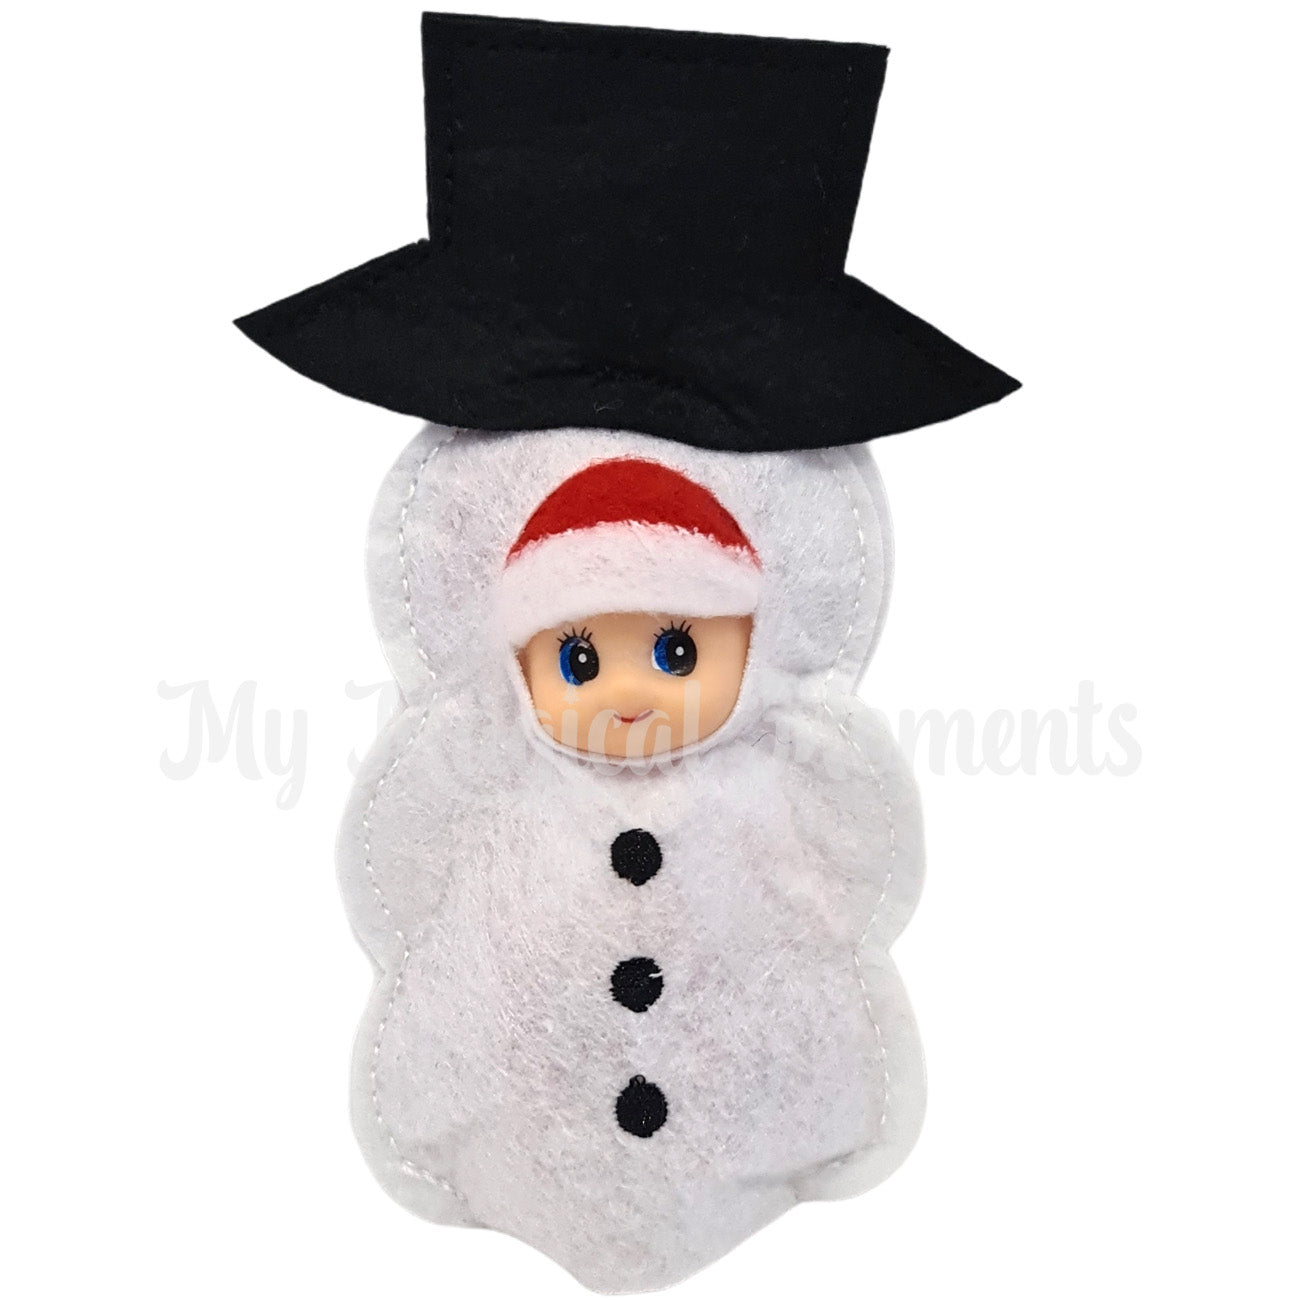 Elf baby wearing a snowman costume